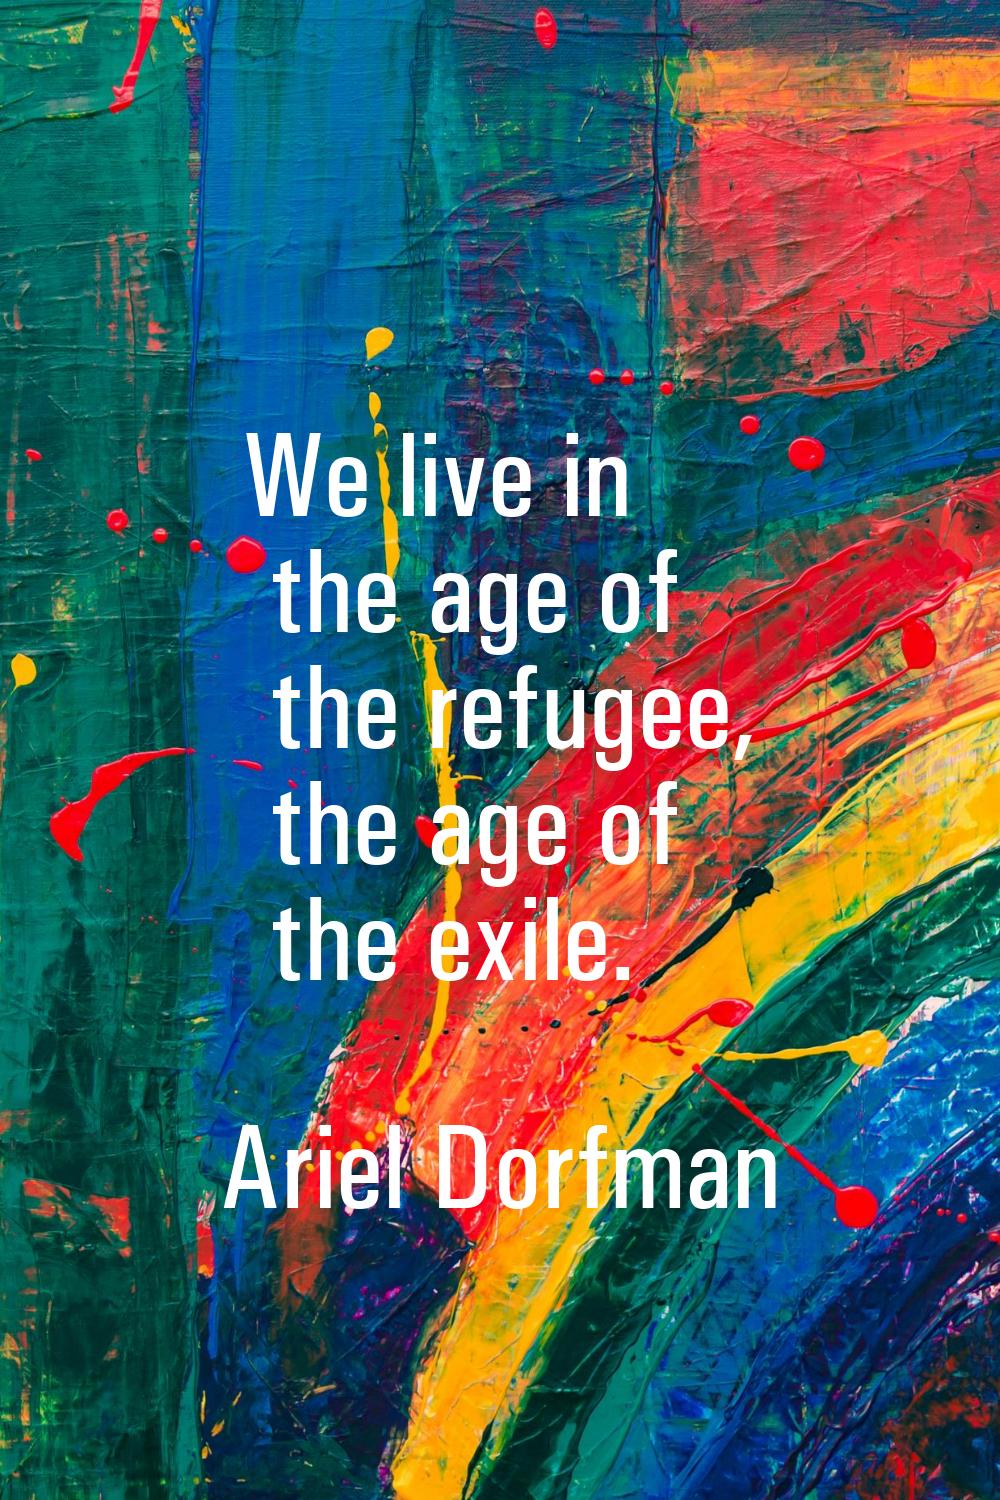 We live in the age of the refugee, the age of the exile.